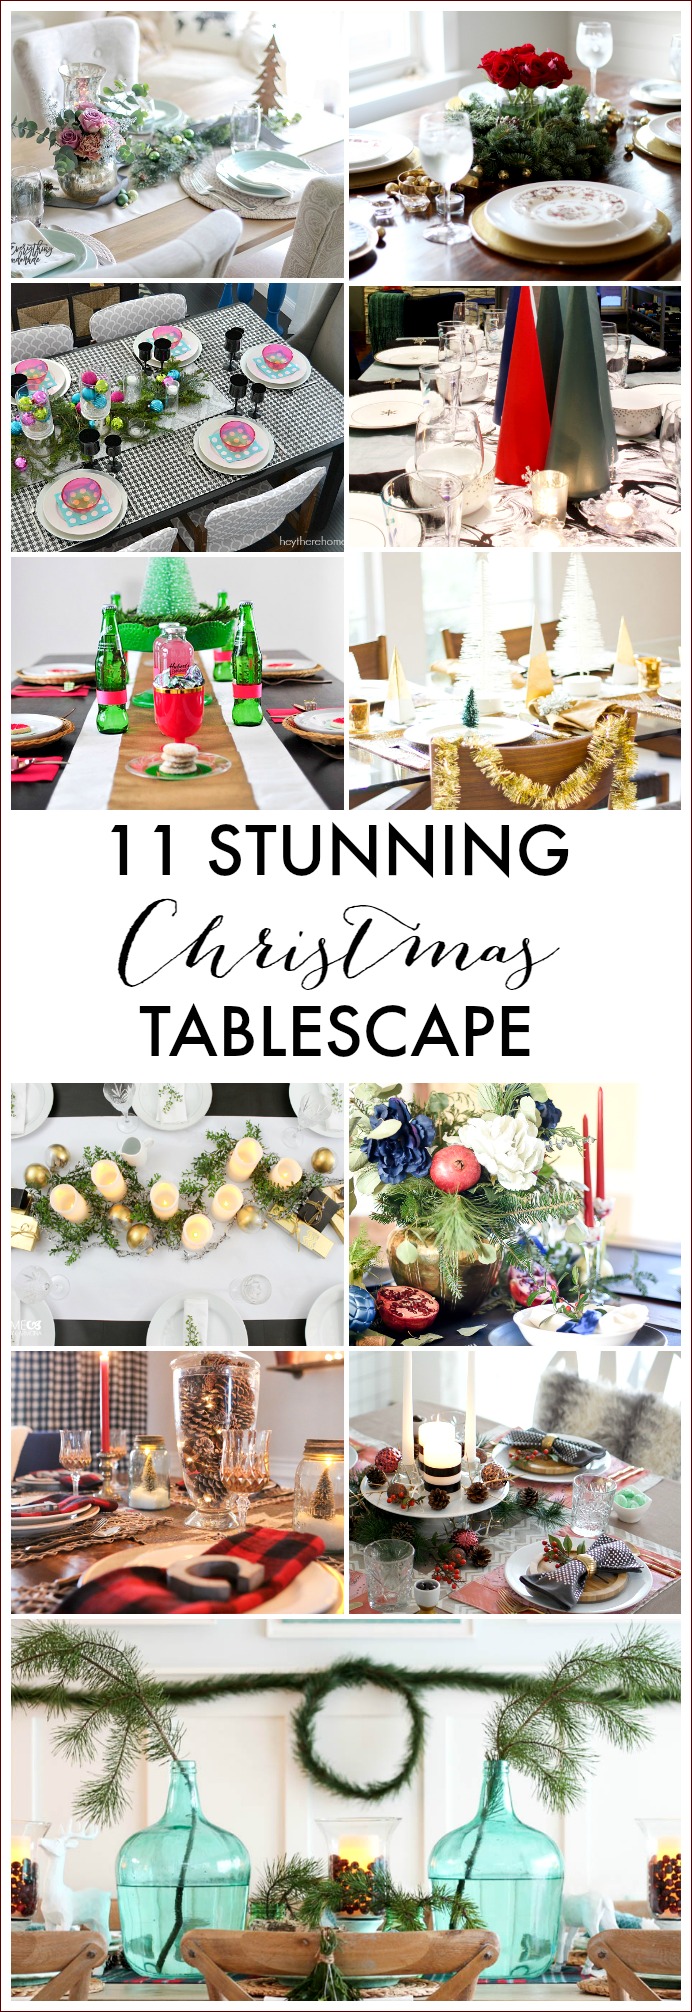 11 stunning Christmas tablescapes graphic.